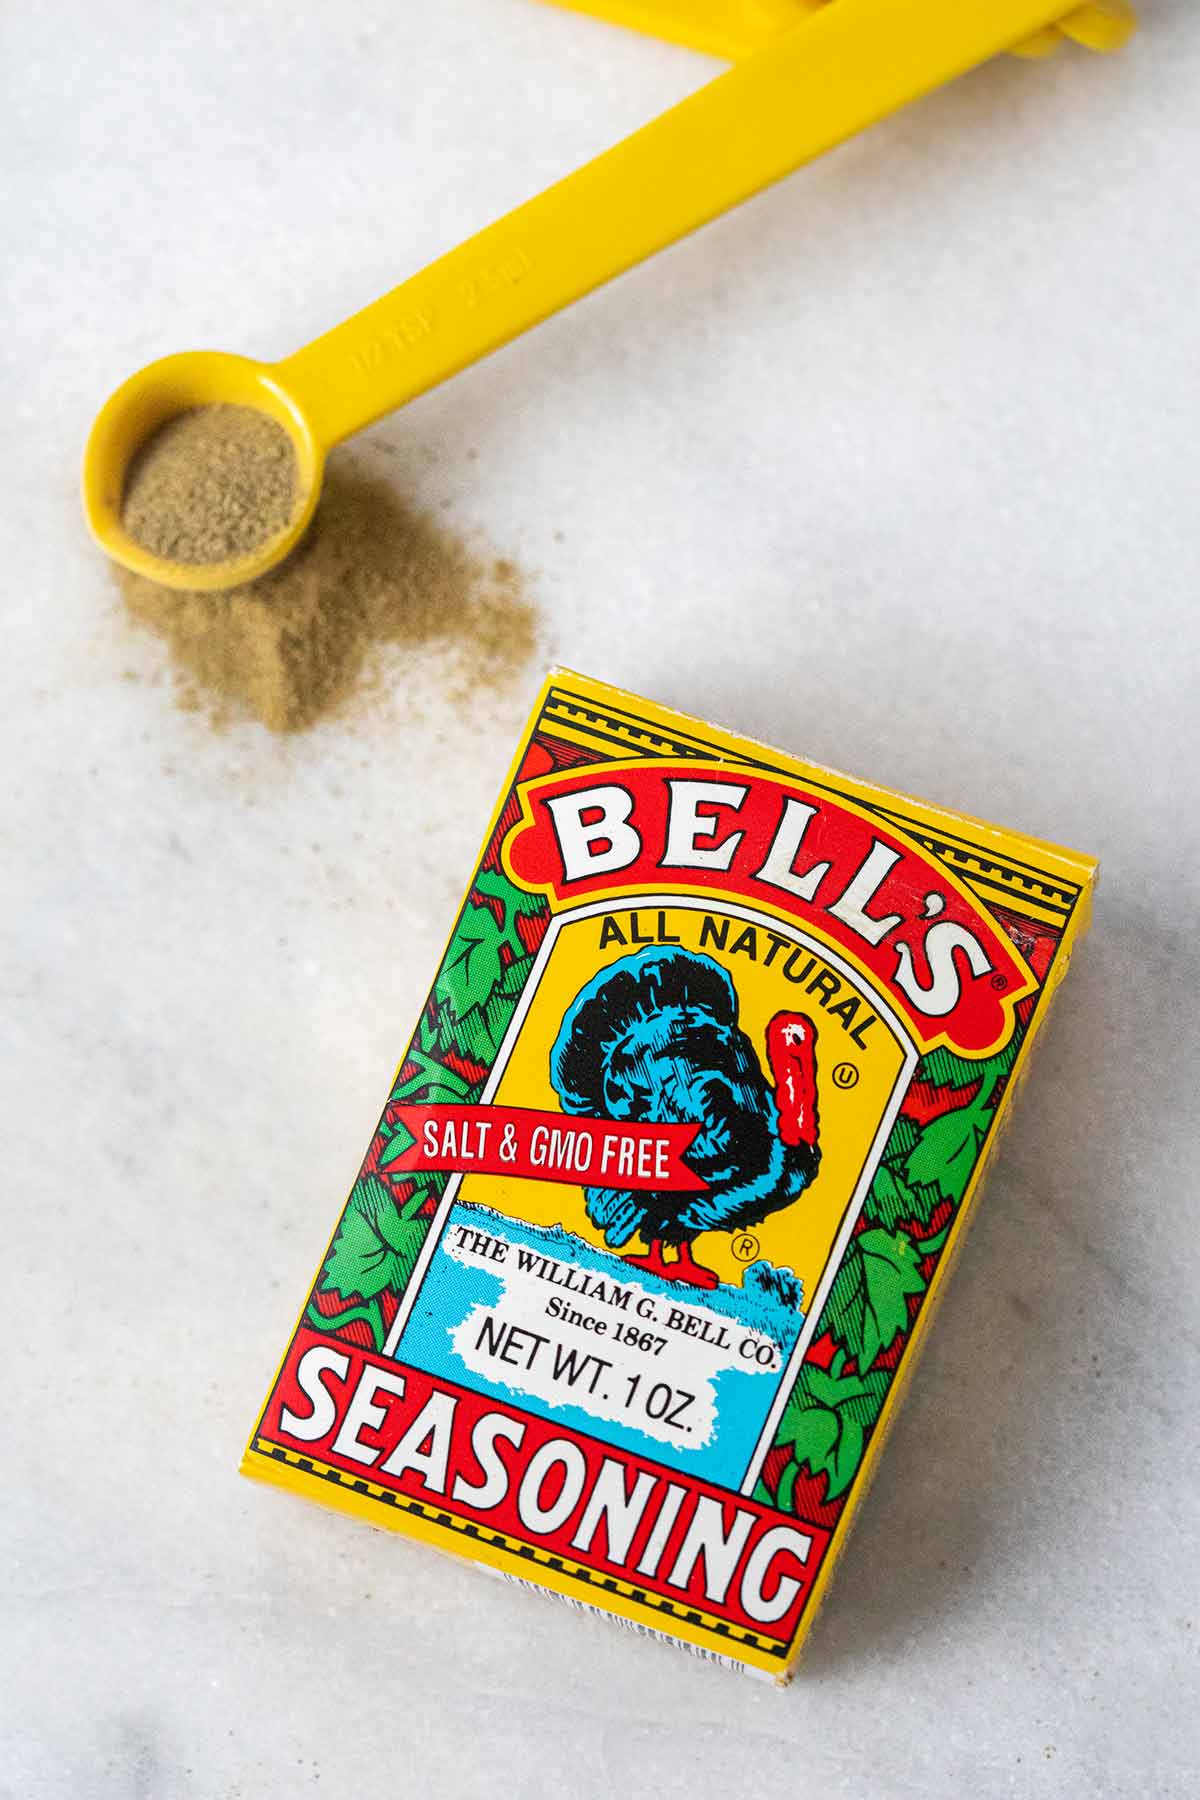 A box of Bell's seasoning with a partially filled measuring spoon beside it.